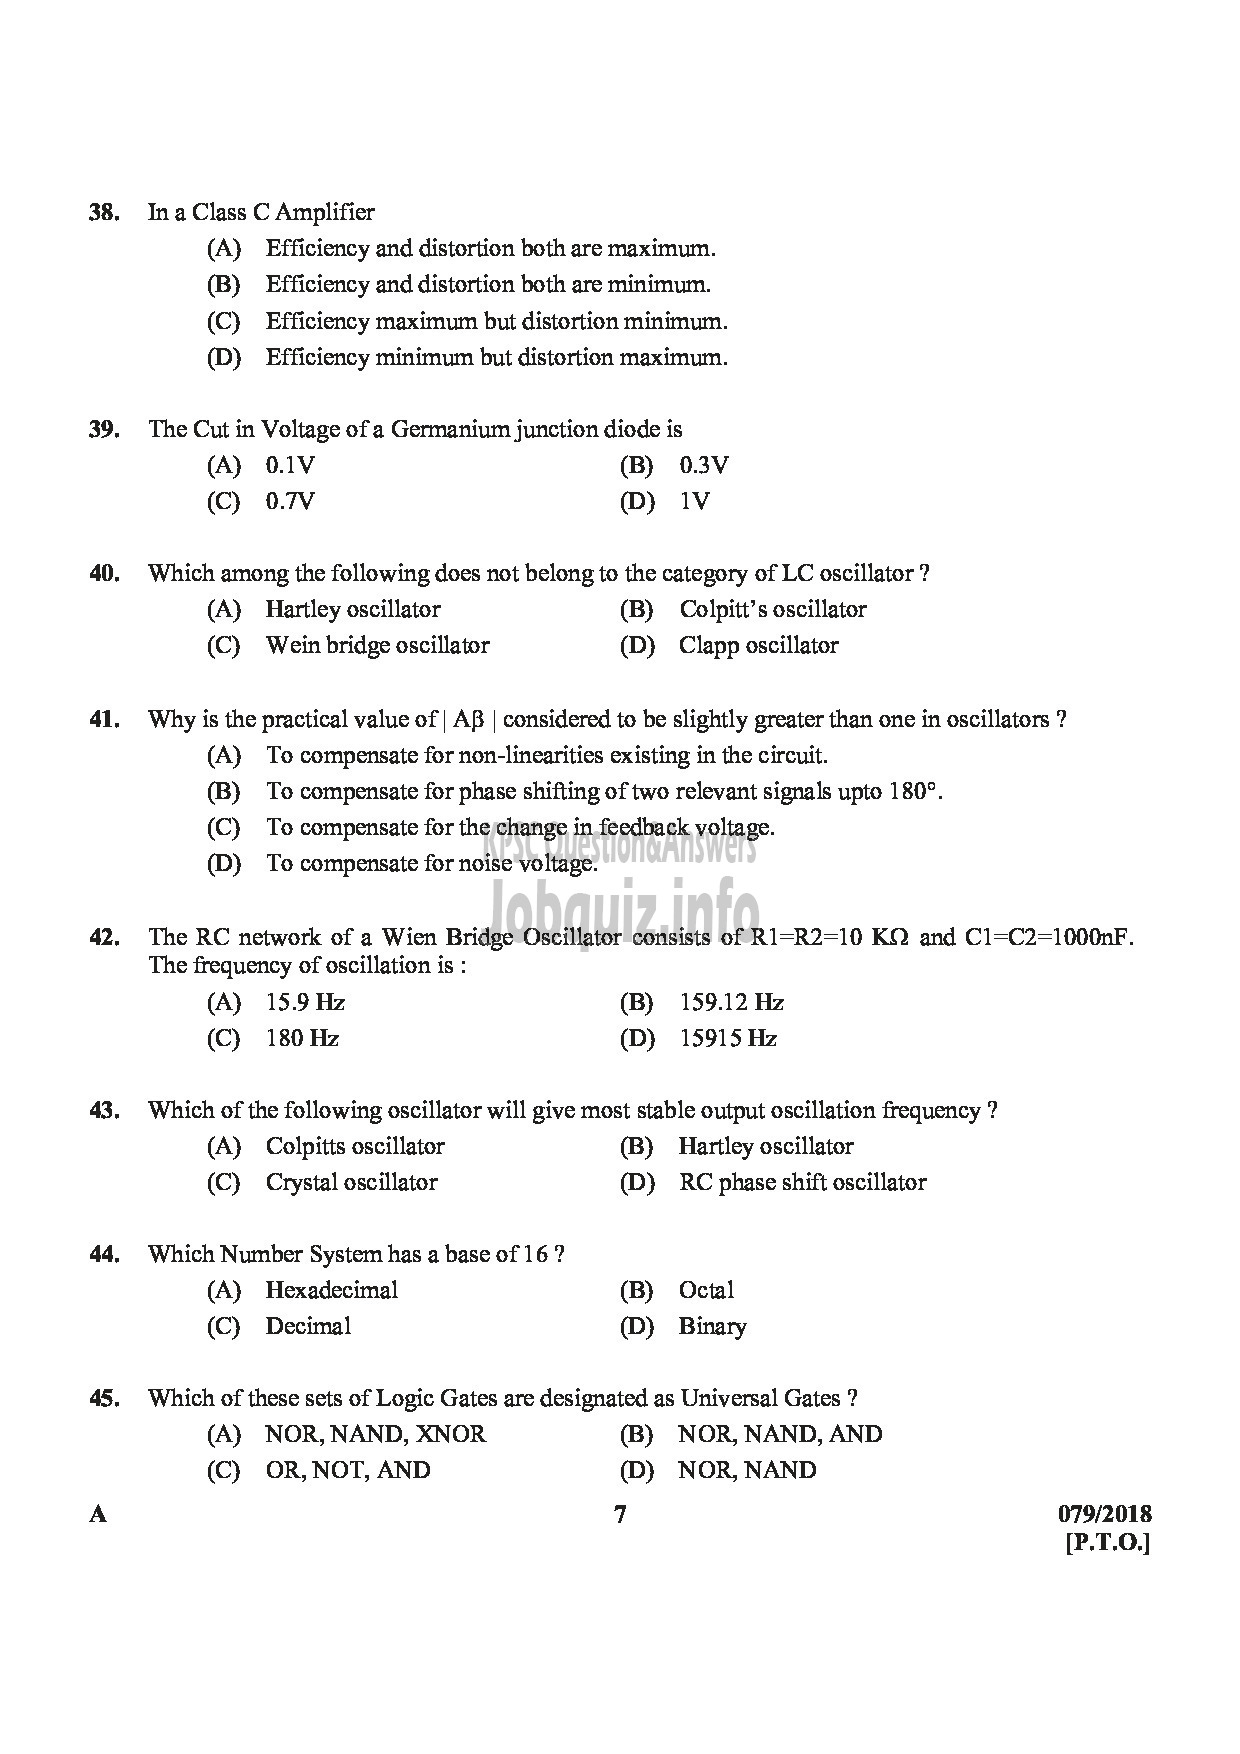 Kerala PSC Question Paper - JUNIOR INSTRUCTOR ELECTRONIC MECHANIC INDUSTRIAL TRAINING-7